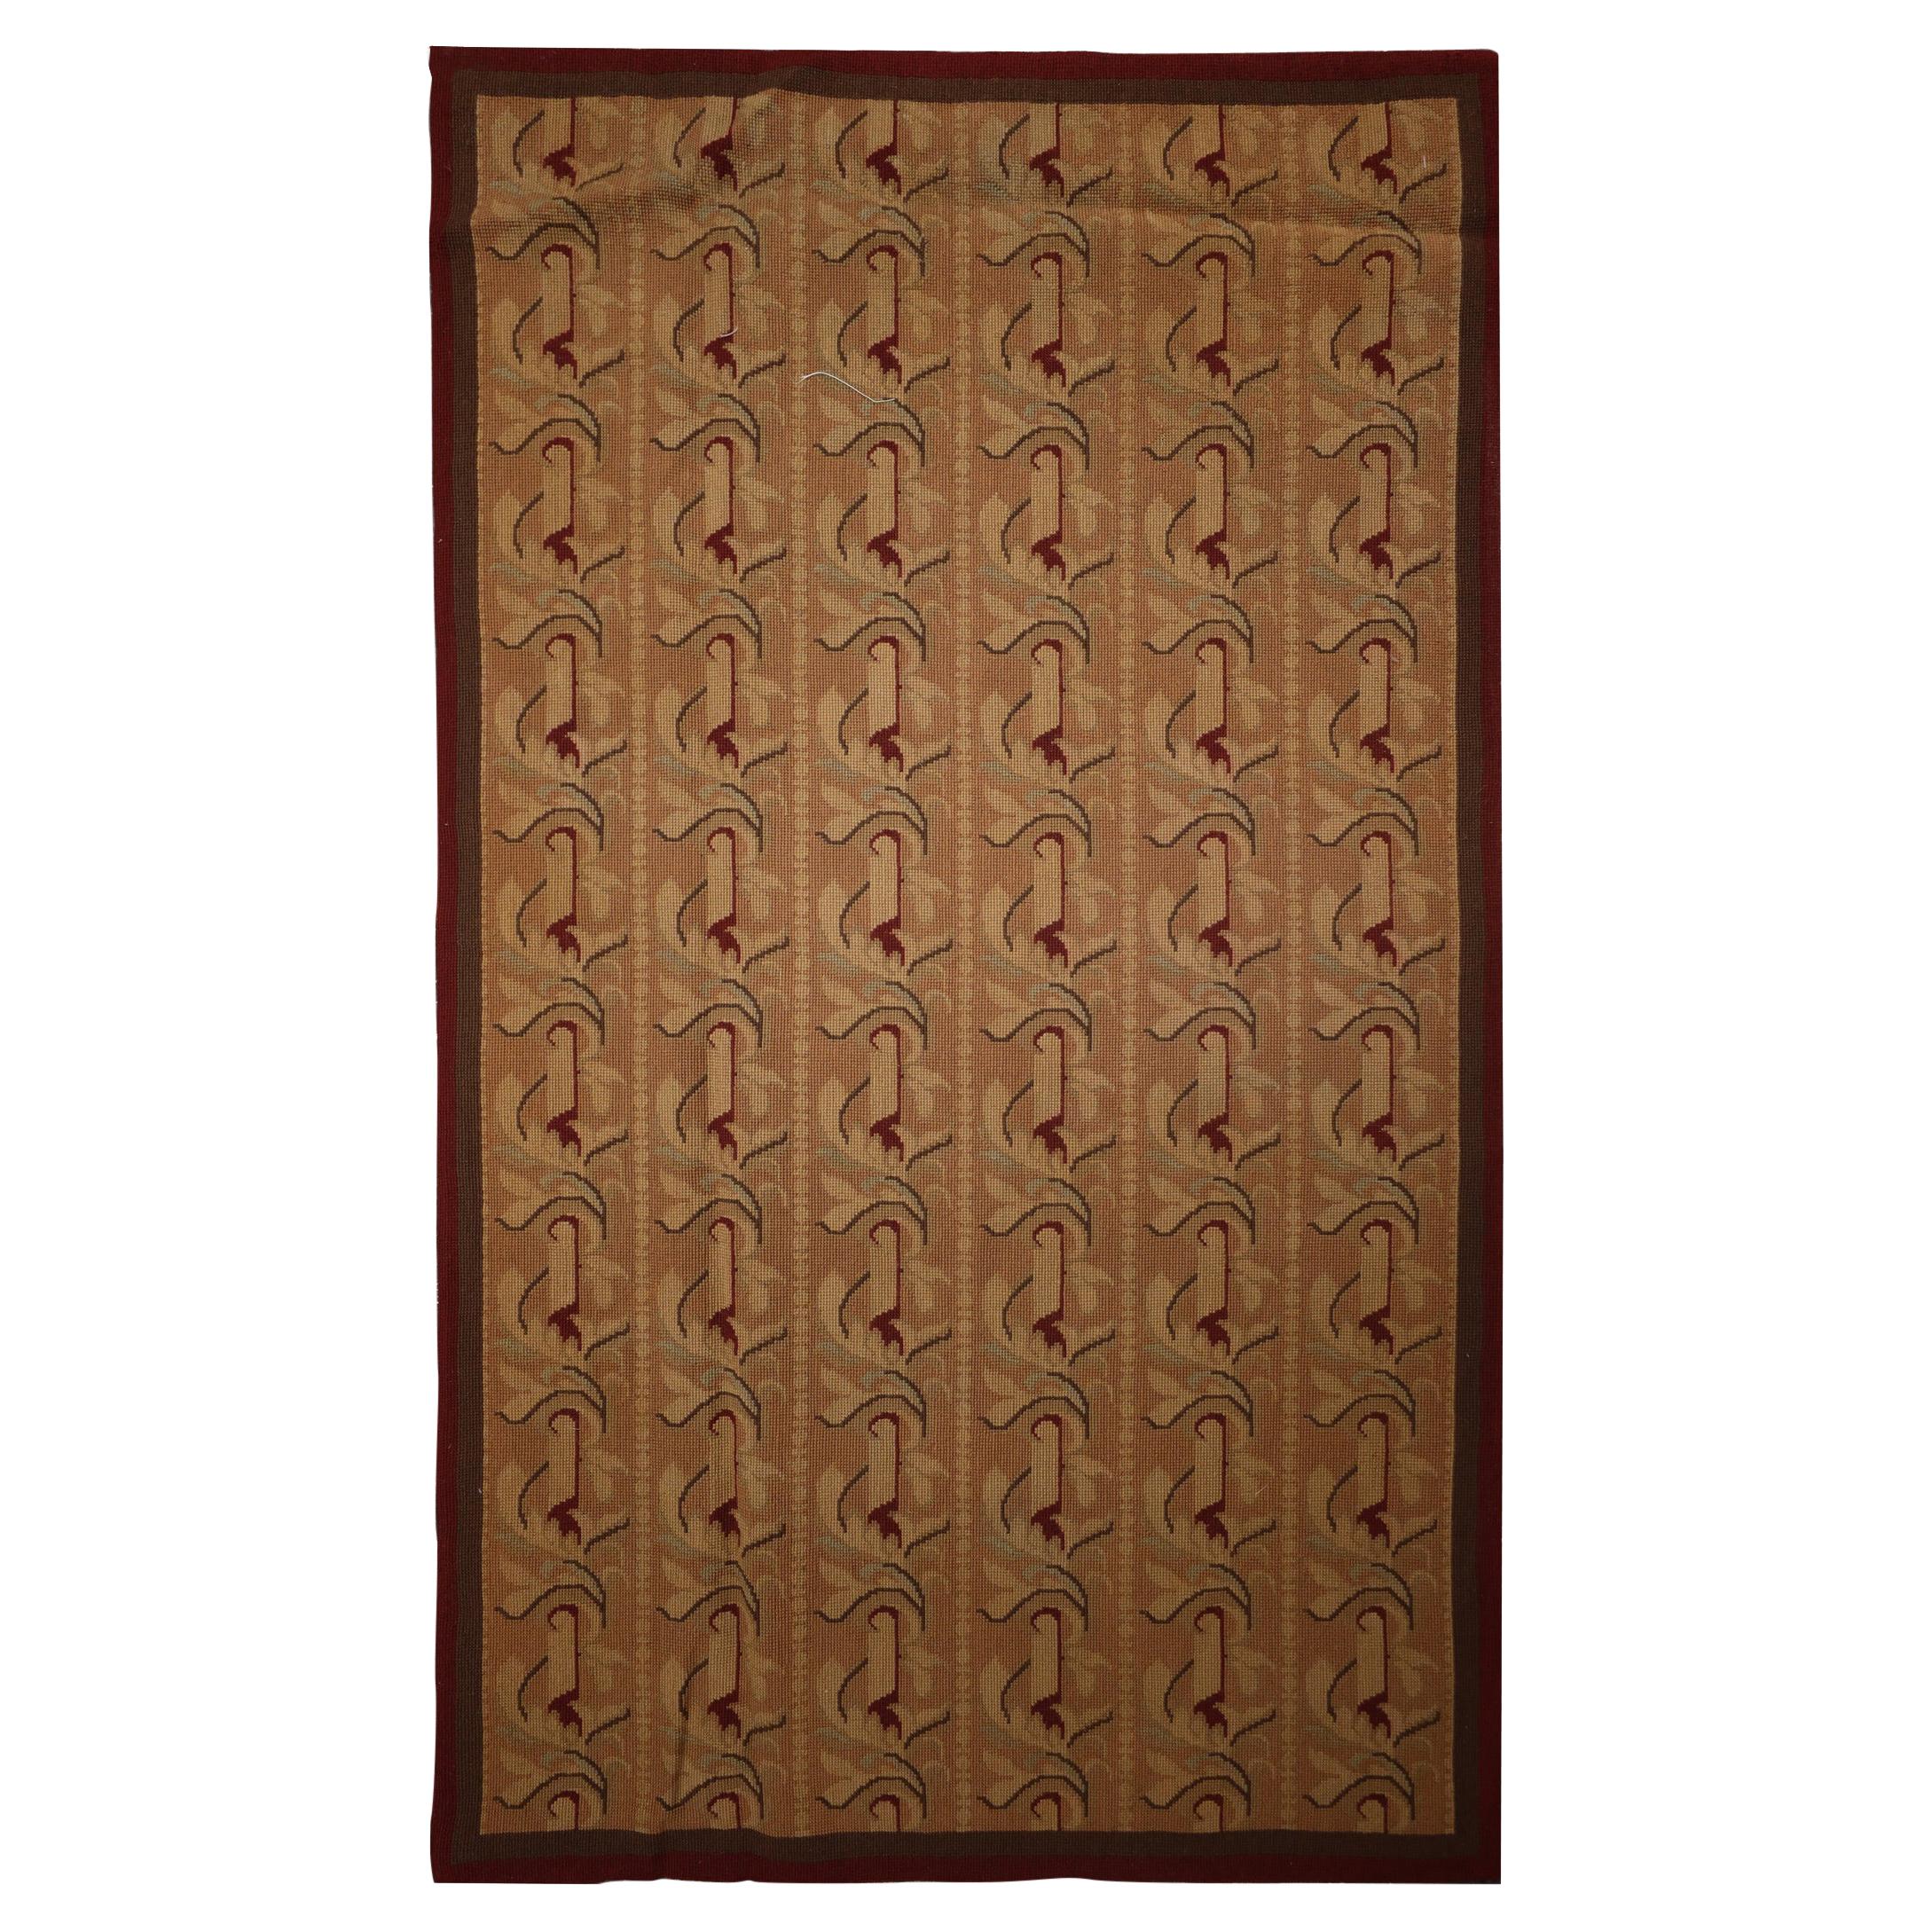 Hand Woven Aubusson Carpet Brown Needlepoint Traditional Wool Area Rug